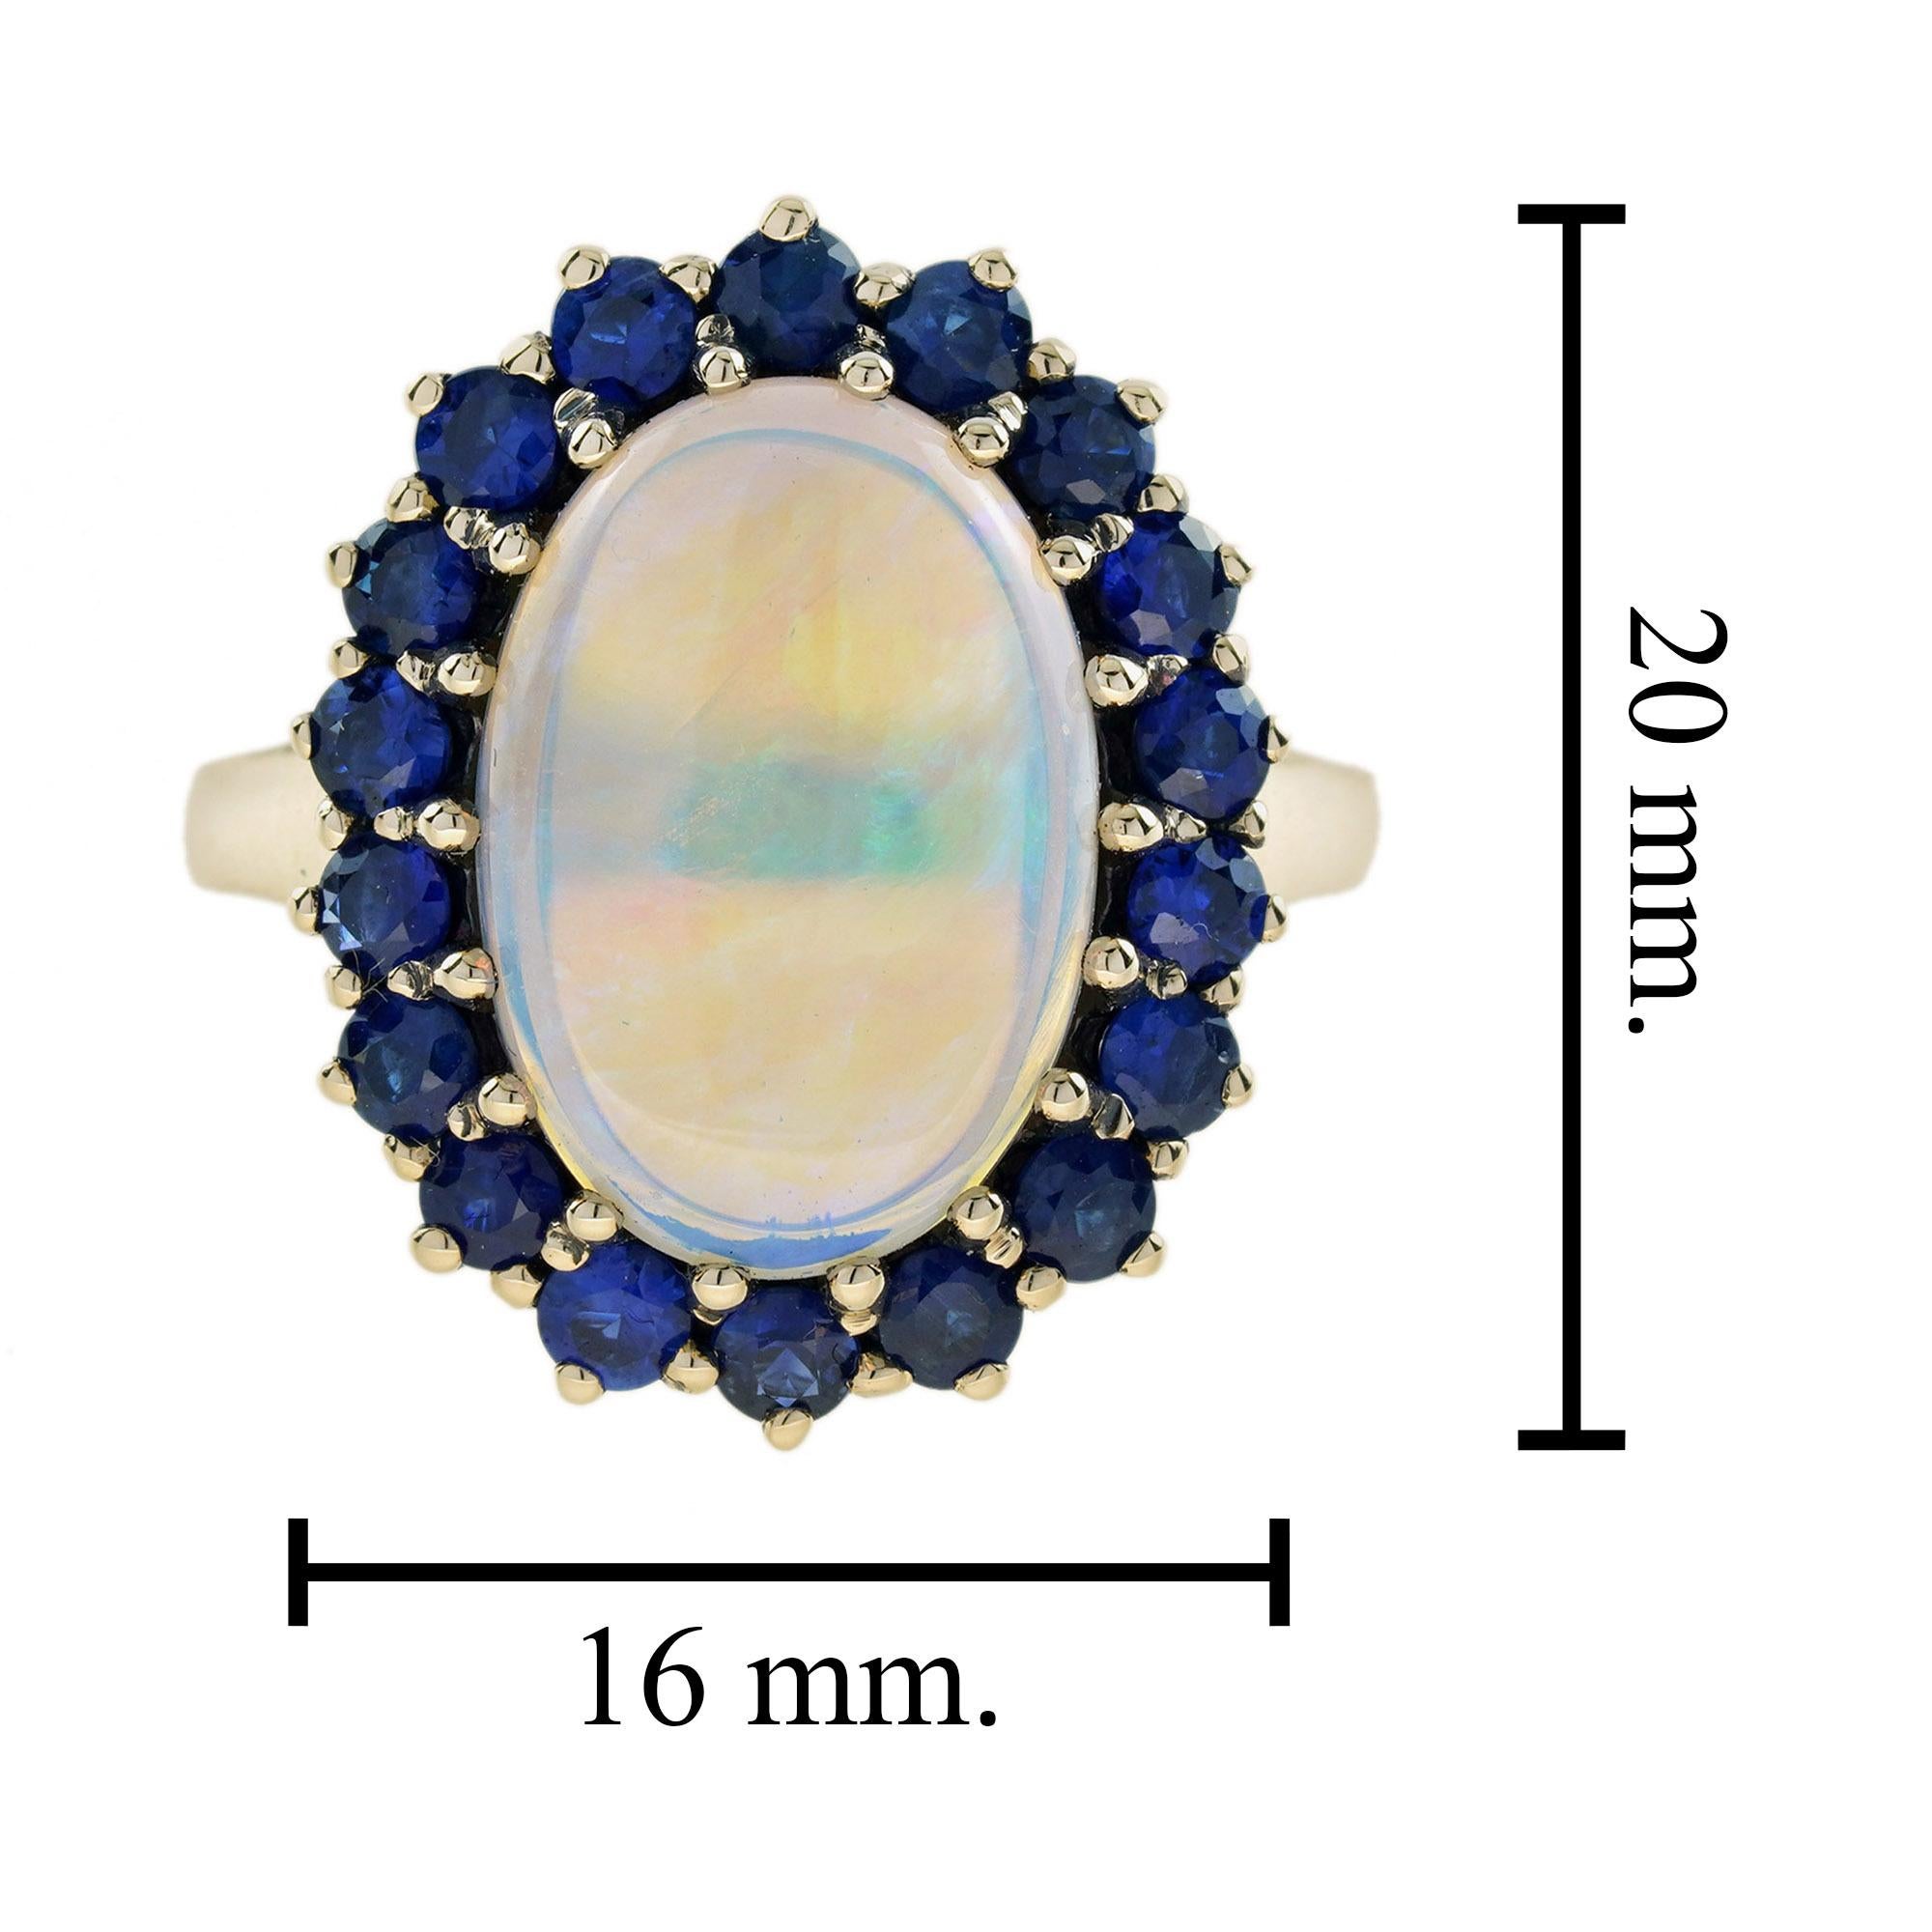 Women's 3.43 Ct. Opal with Blue Sapphire Vintage Style Cocktail Ring in 9K Yellow Gold